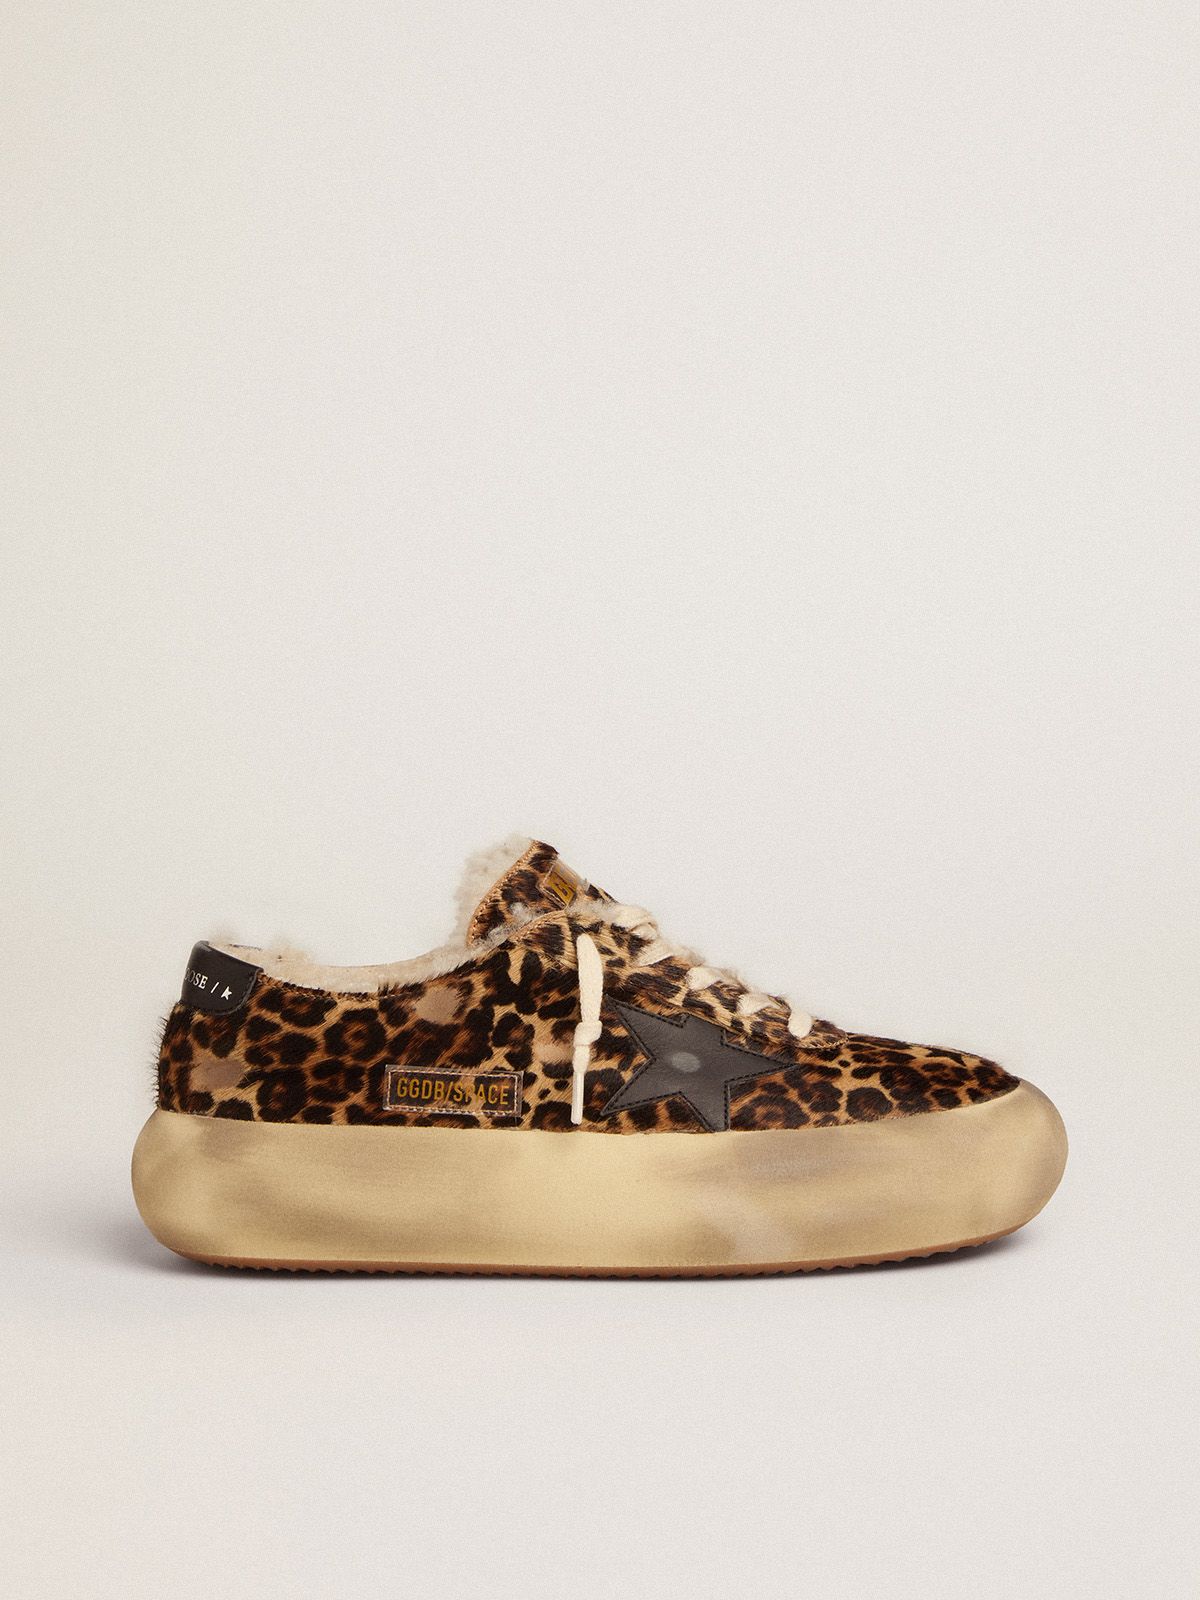 Goldengoose Ball Star Space-Star shoes in animal-print pony skin with shearling lining